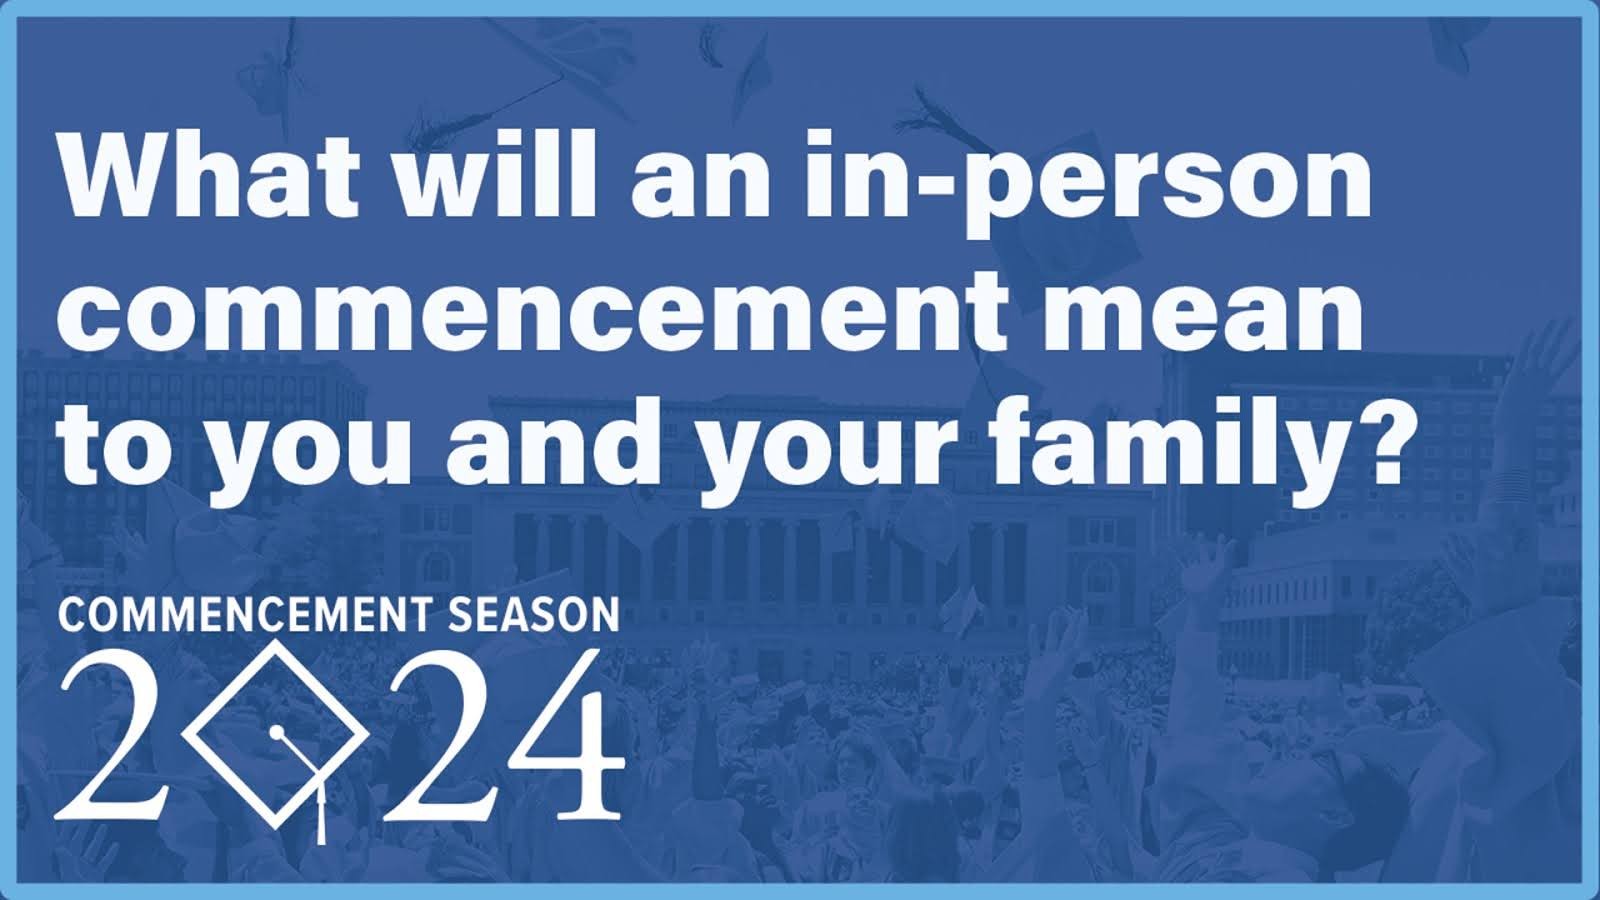 What will an in-person commencement mean to you and your family?